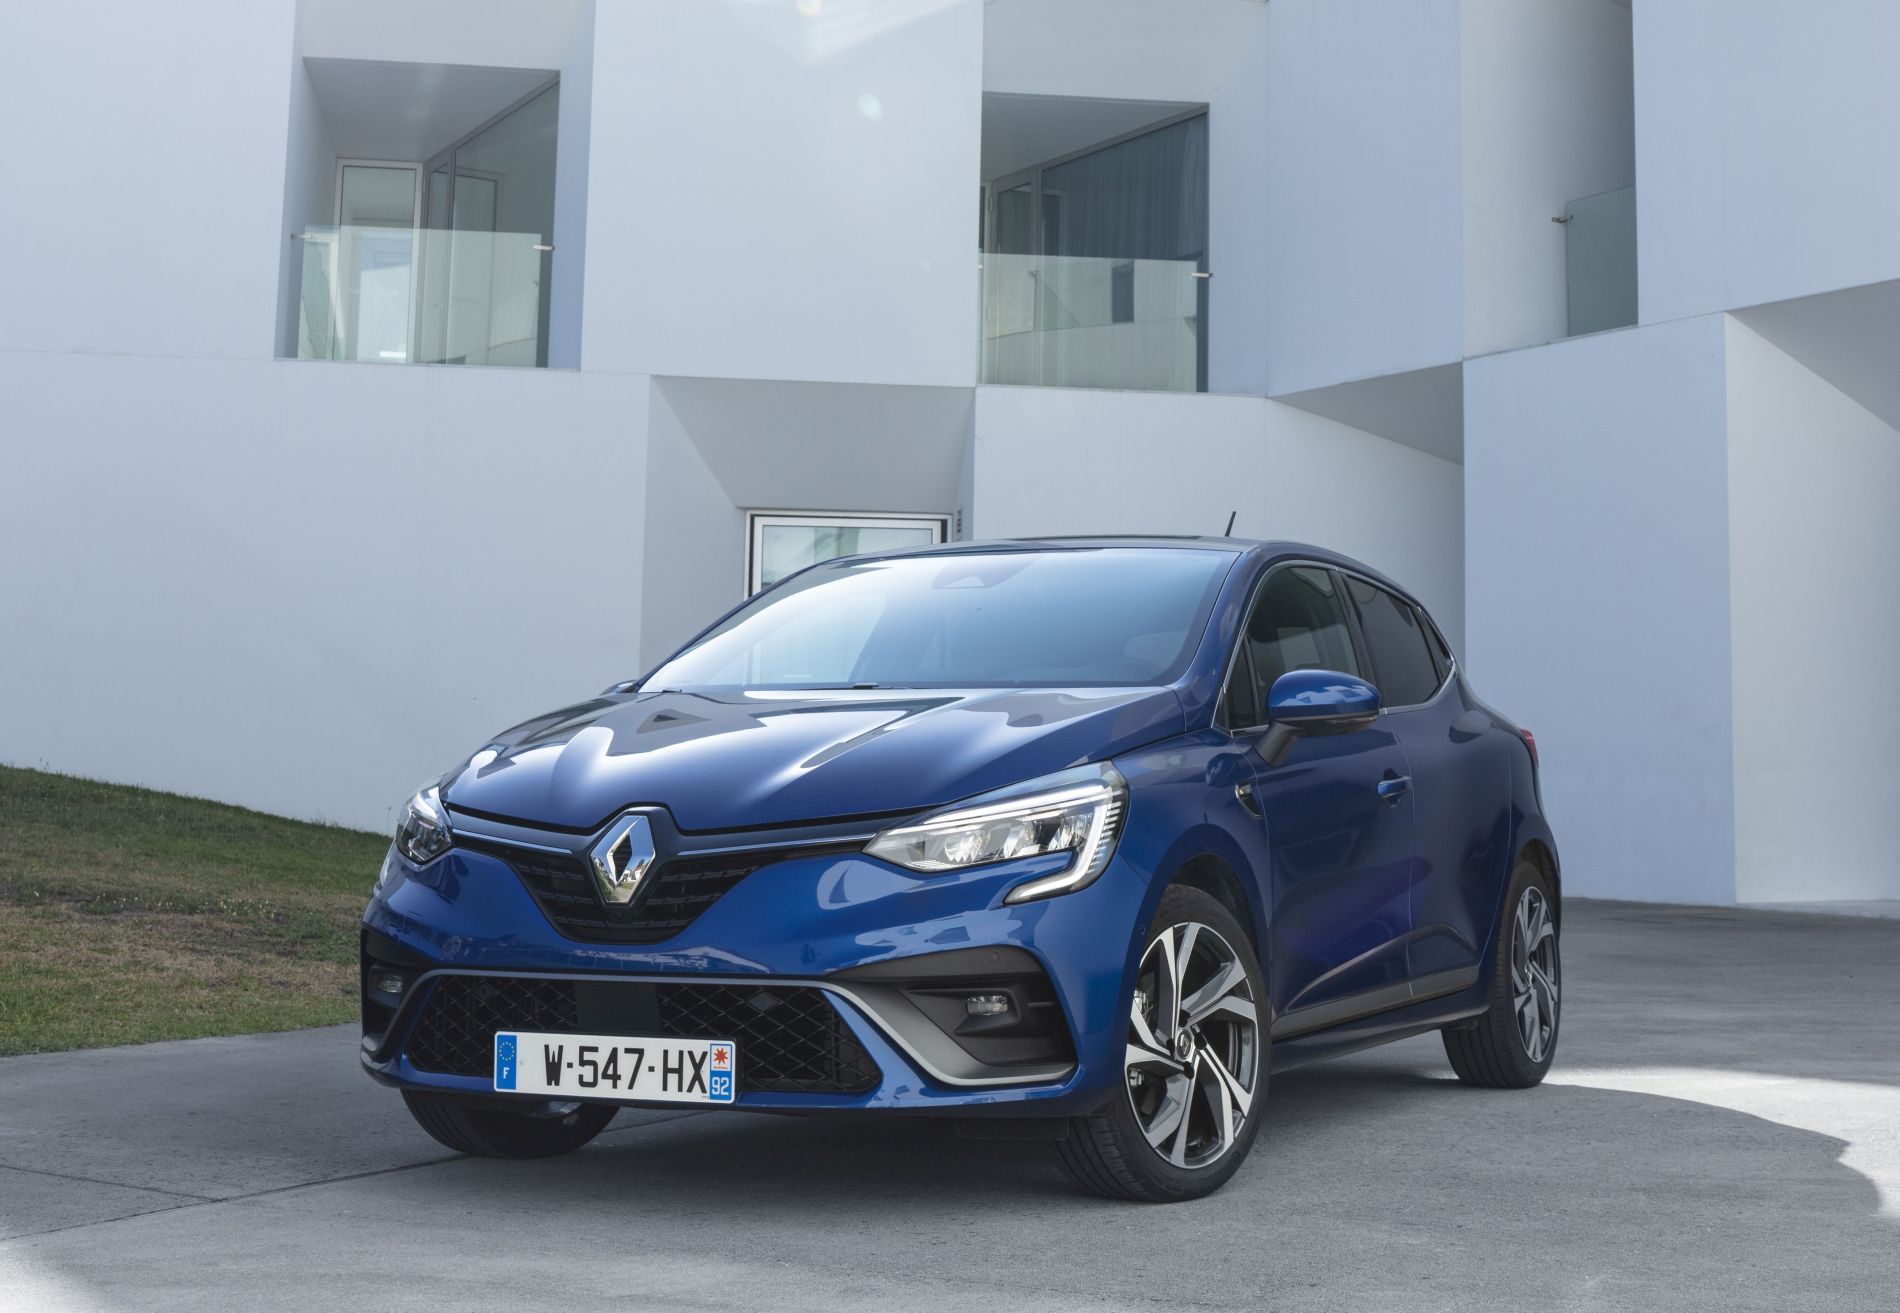 All-new Renault Clio R.S. Line – Blue Iron (18)